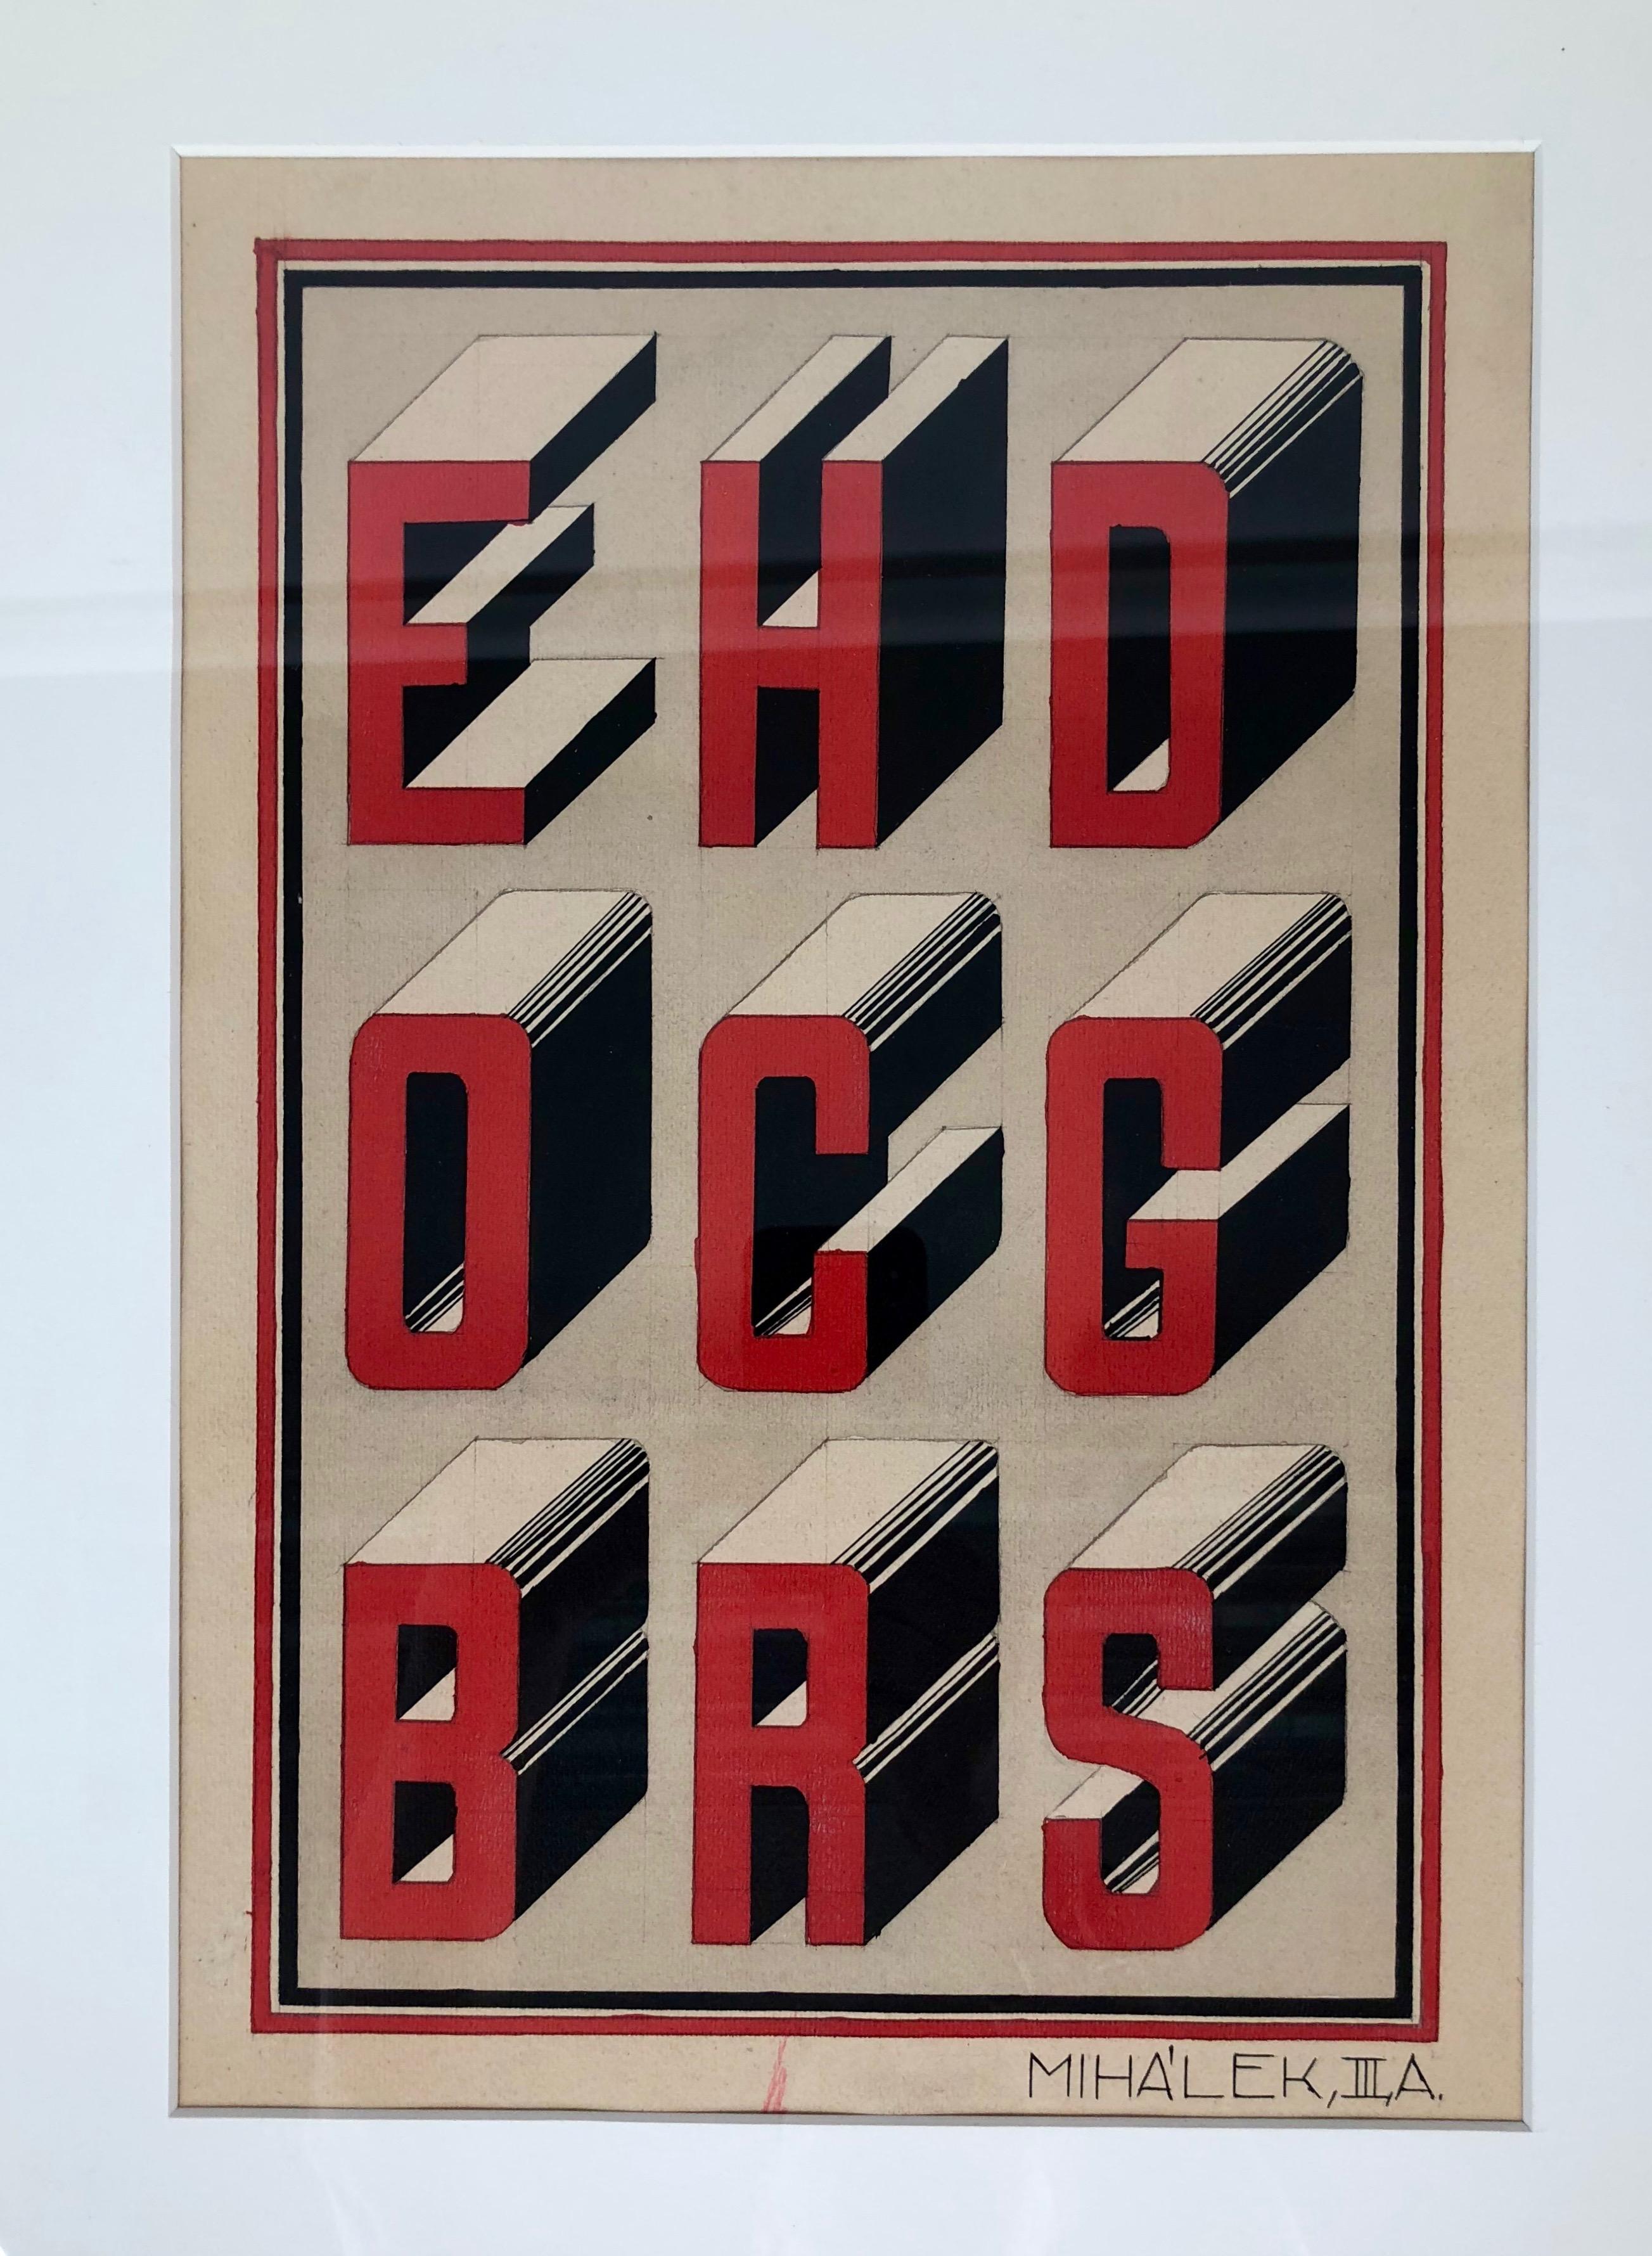 Two decorative studies in typography, painted in gouache on paper with influences from the Bauhaus.
The studies were made in the master class for graphic design in Pressburg.
Both pieces are signed: 